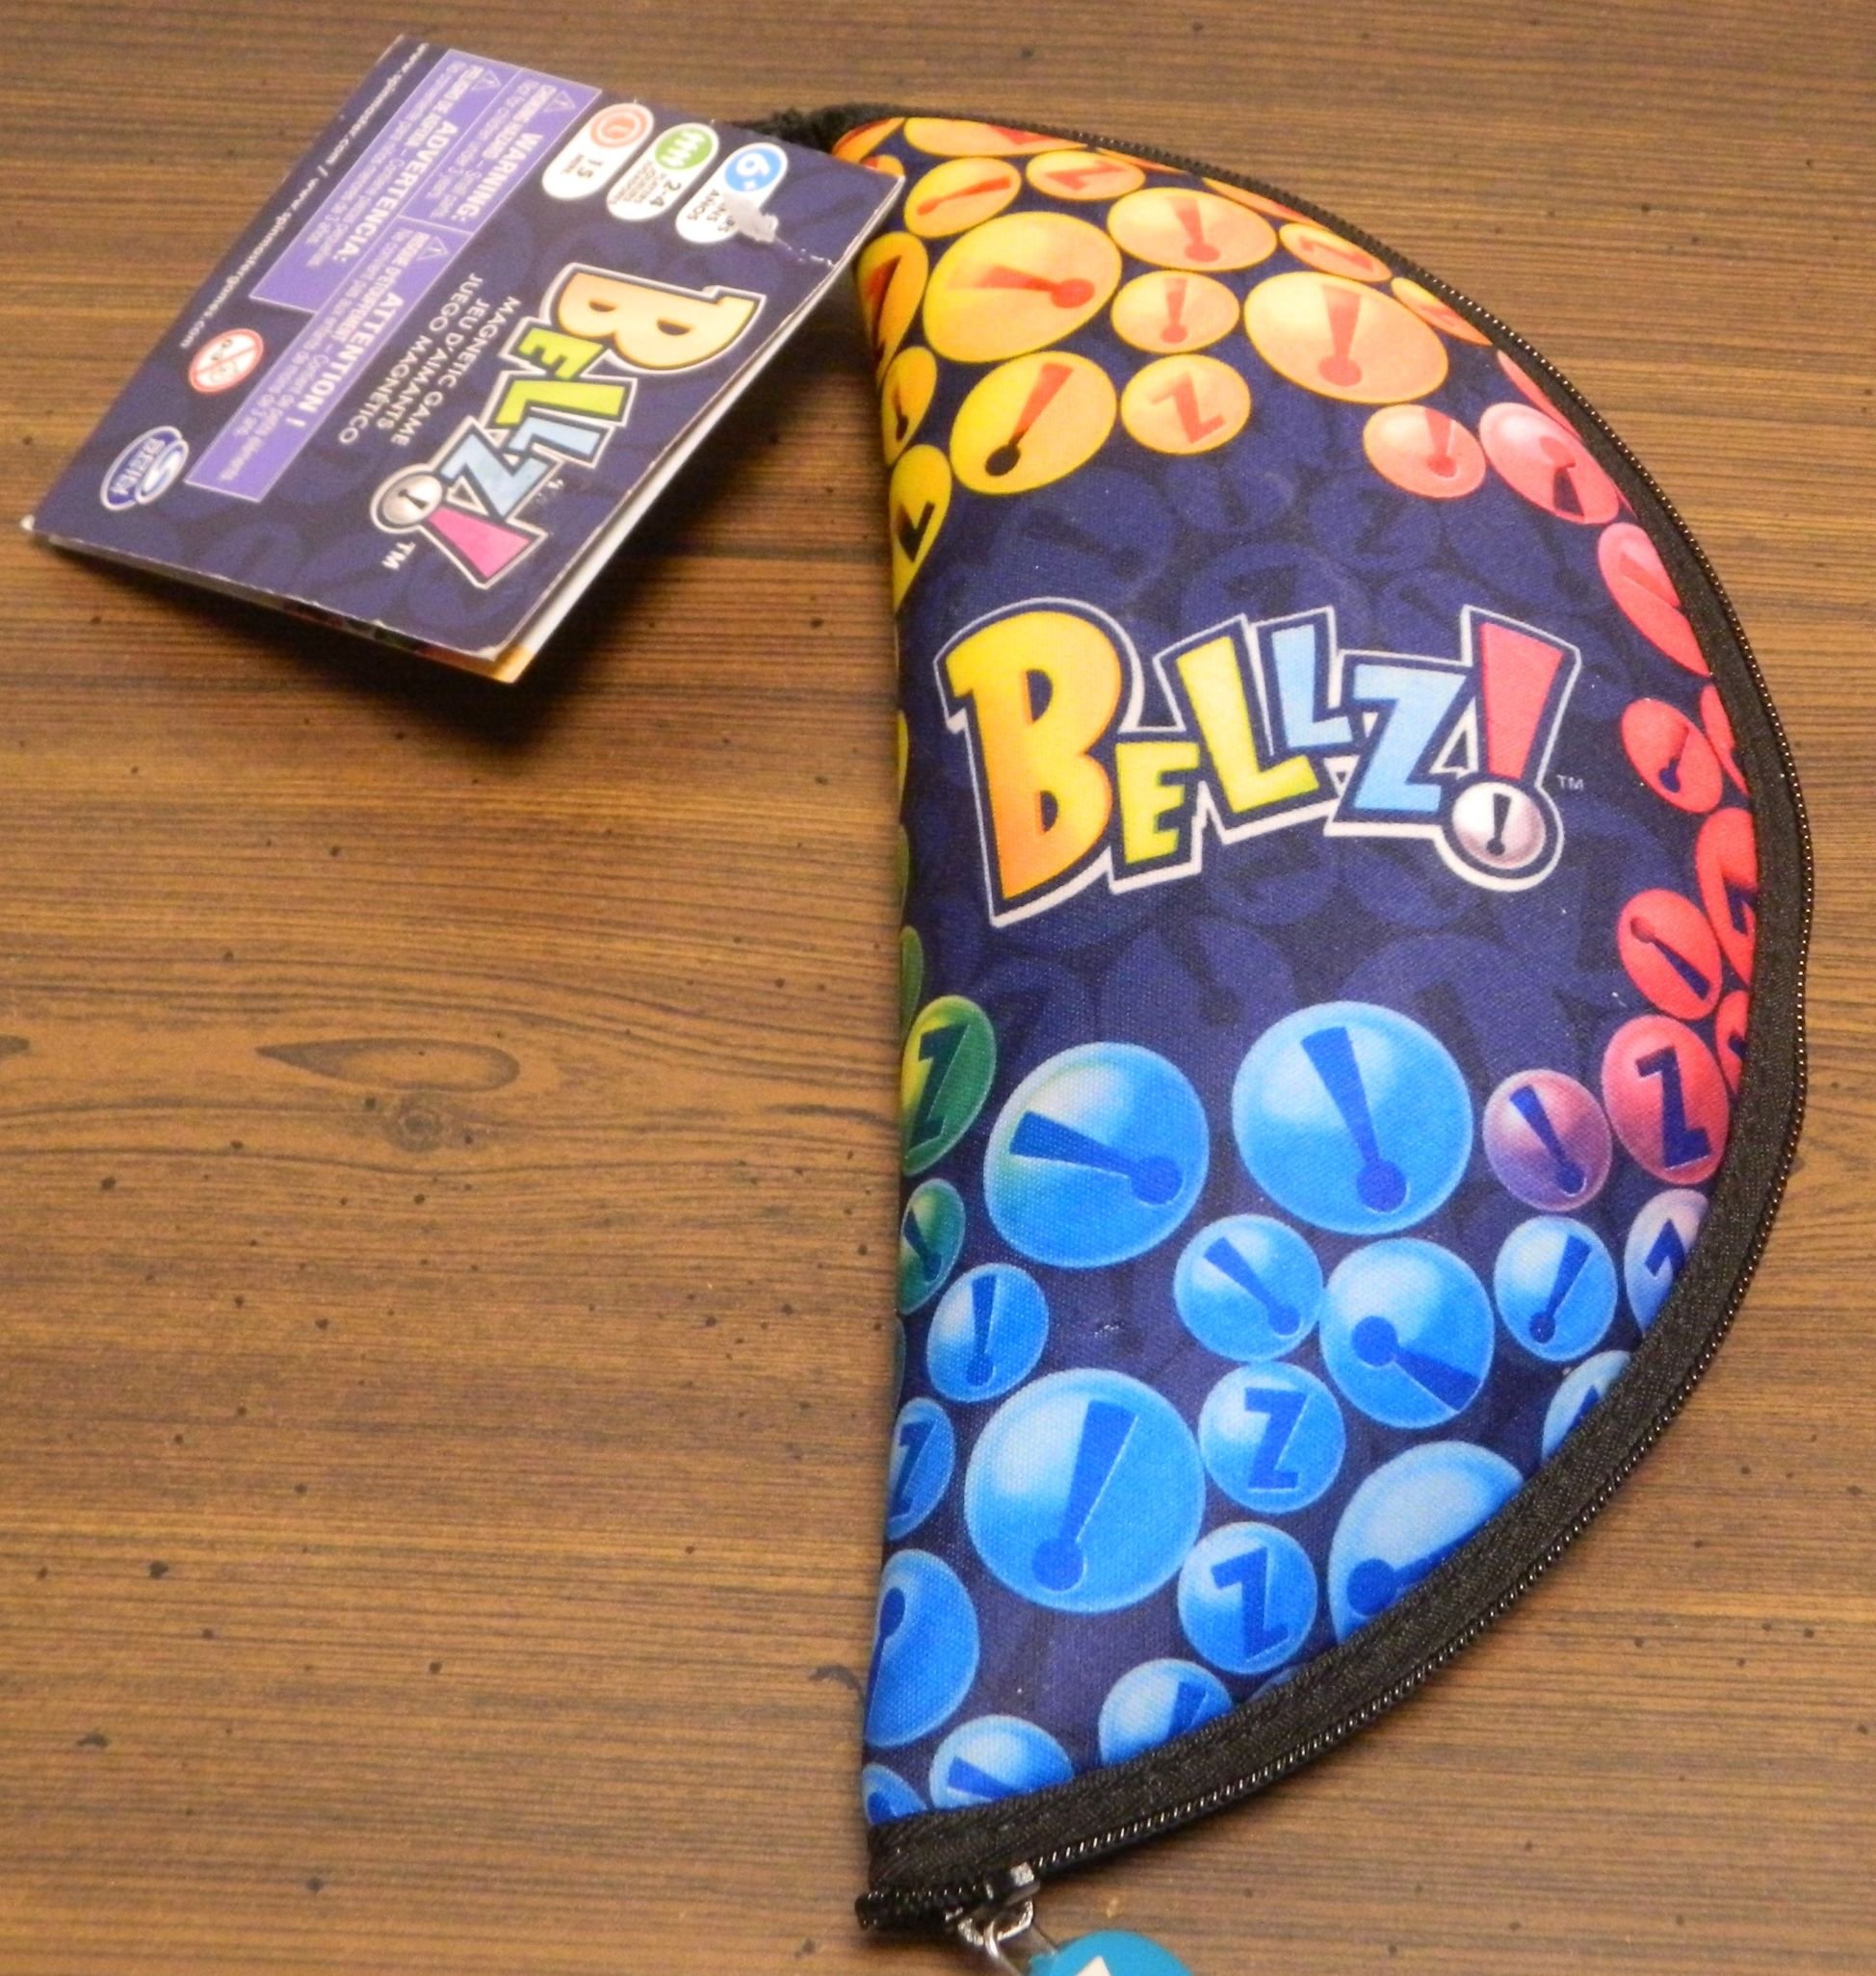 Bellz! Board Game Review and Rules